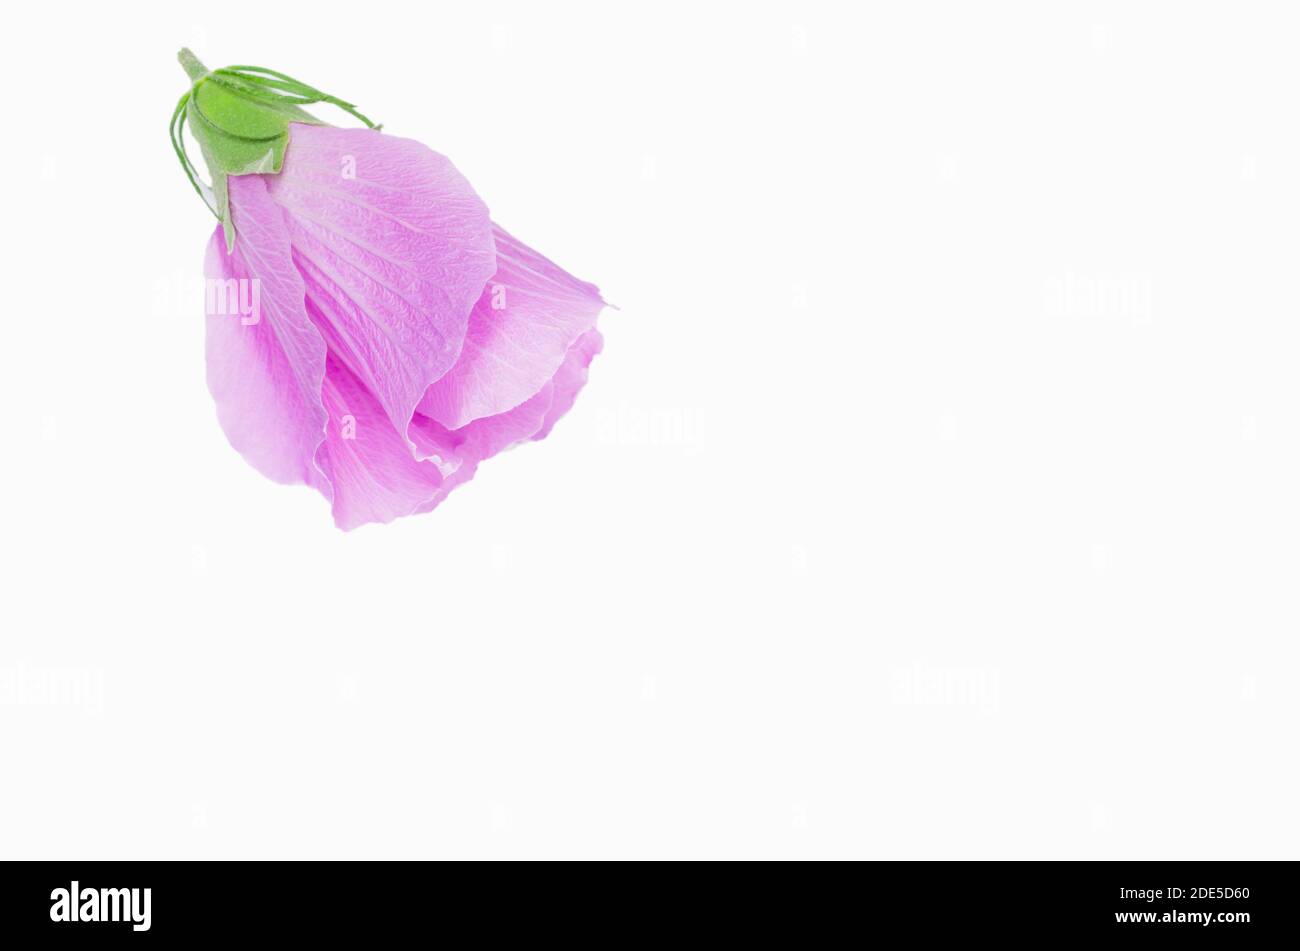 A pink hibiscus cannabinus blossom on a white surface Stock Photo